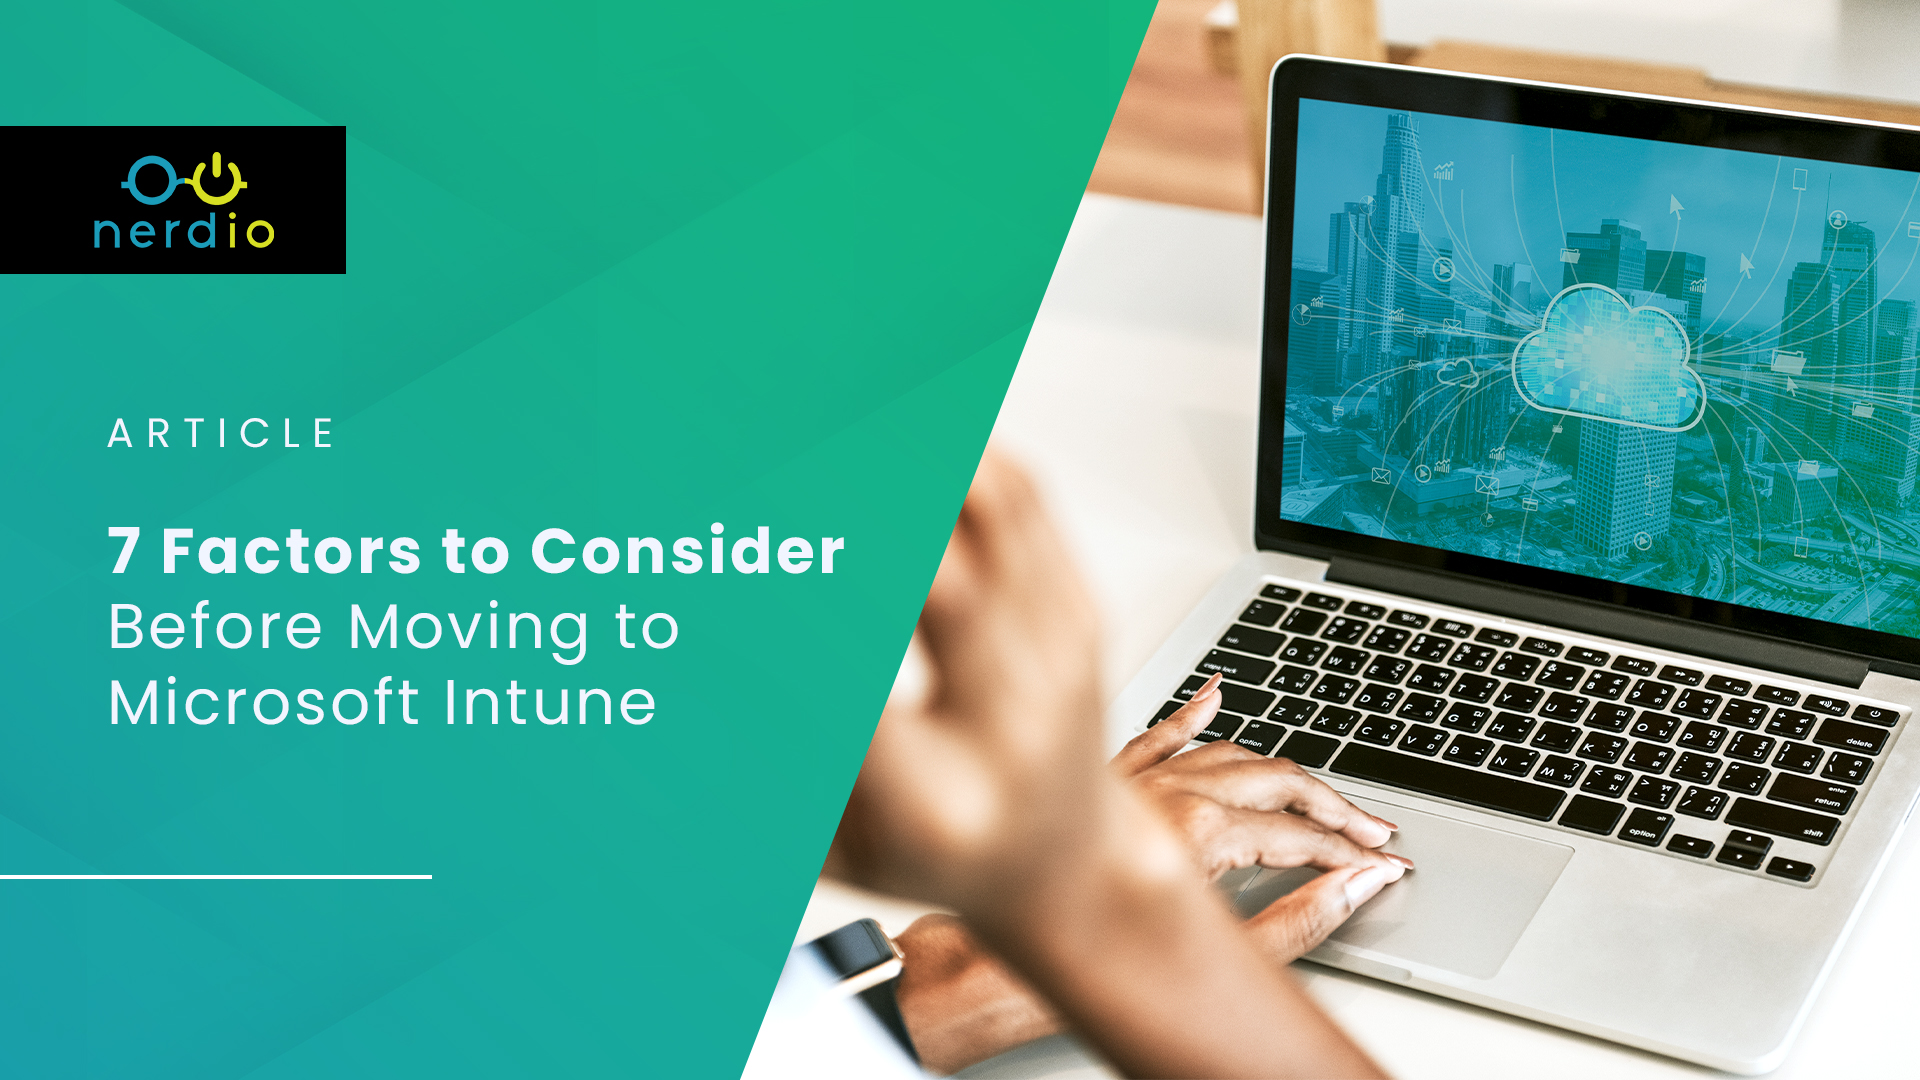 7 Factors to Consider Before Moving to Microsoft Intune